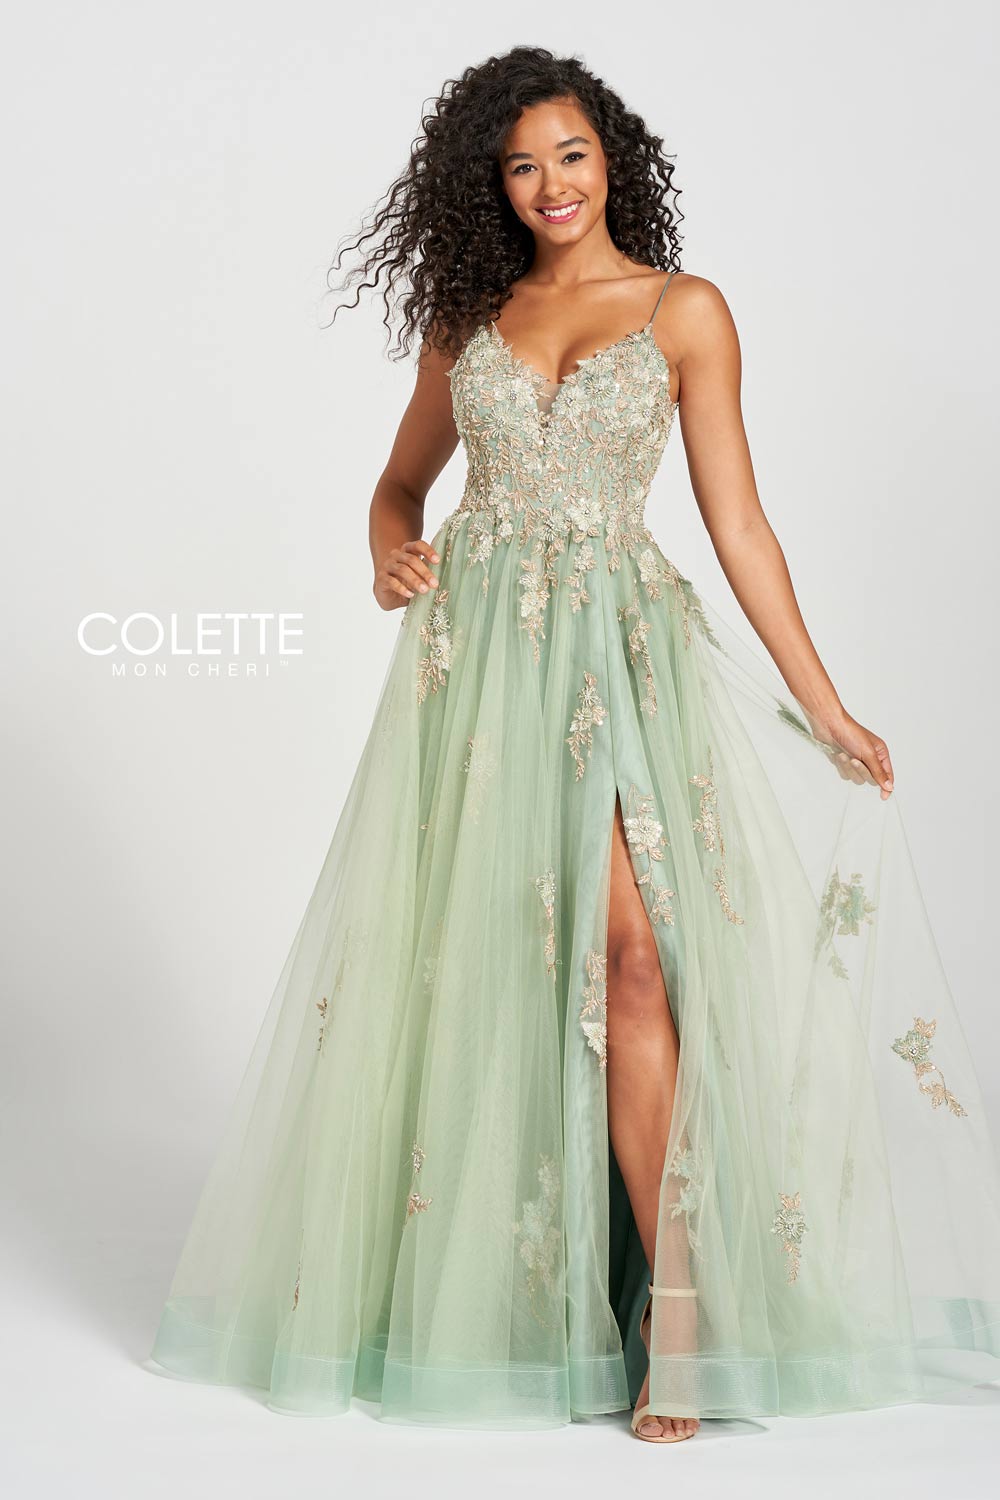 Black curly haired model faced forward wearing ivy prom dress